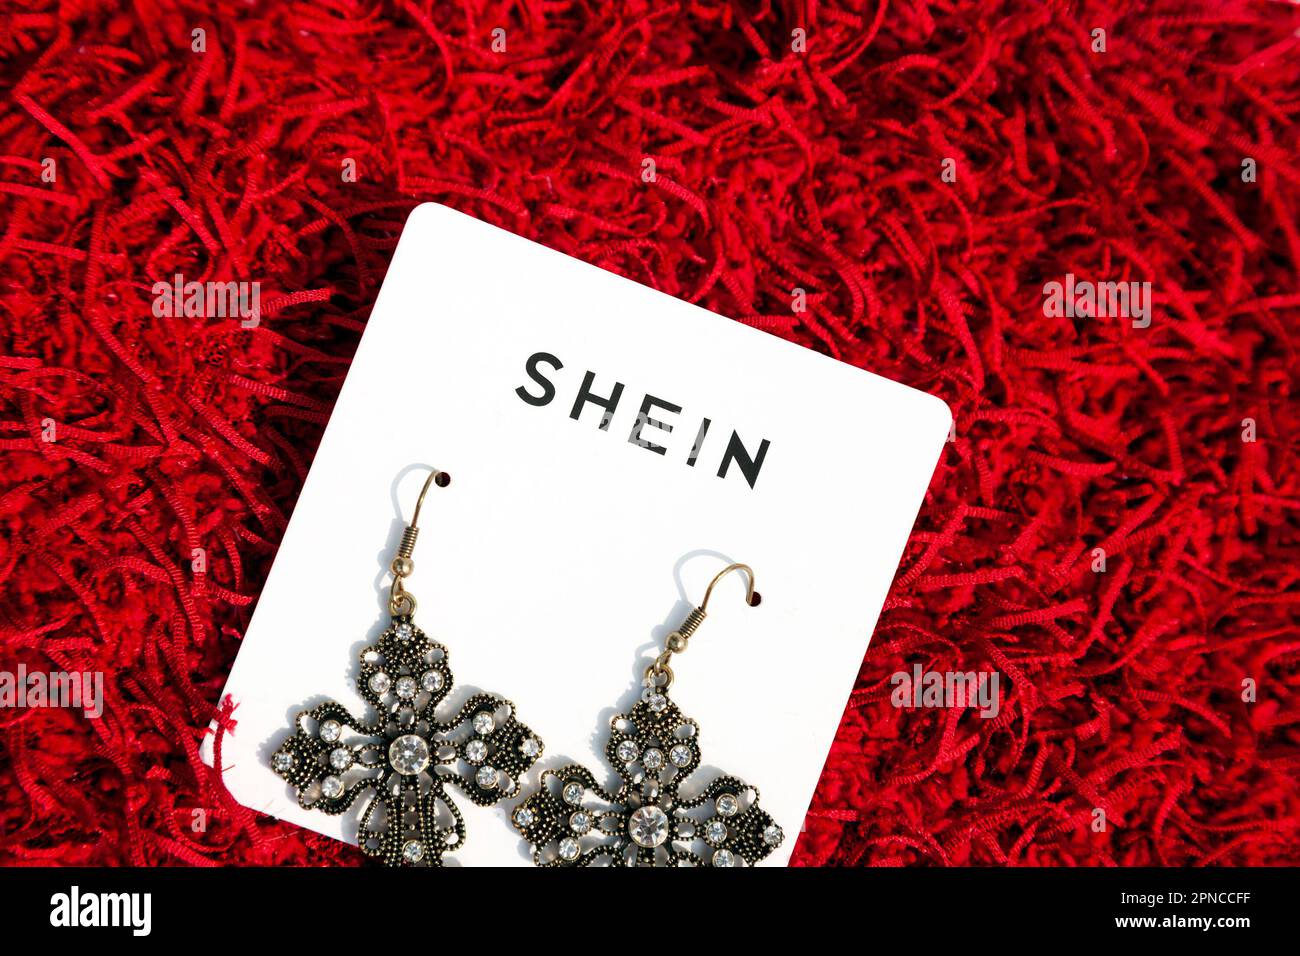 Ho Chi Minh City, Vietnam - April 18, 2023: Chinese online fast fashion retailer Shein logo on a jewelry product. Brand name on vintage style earrings Stock Photo